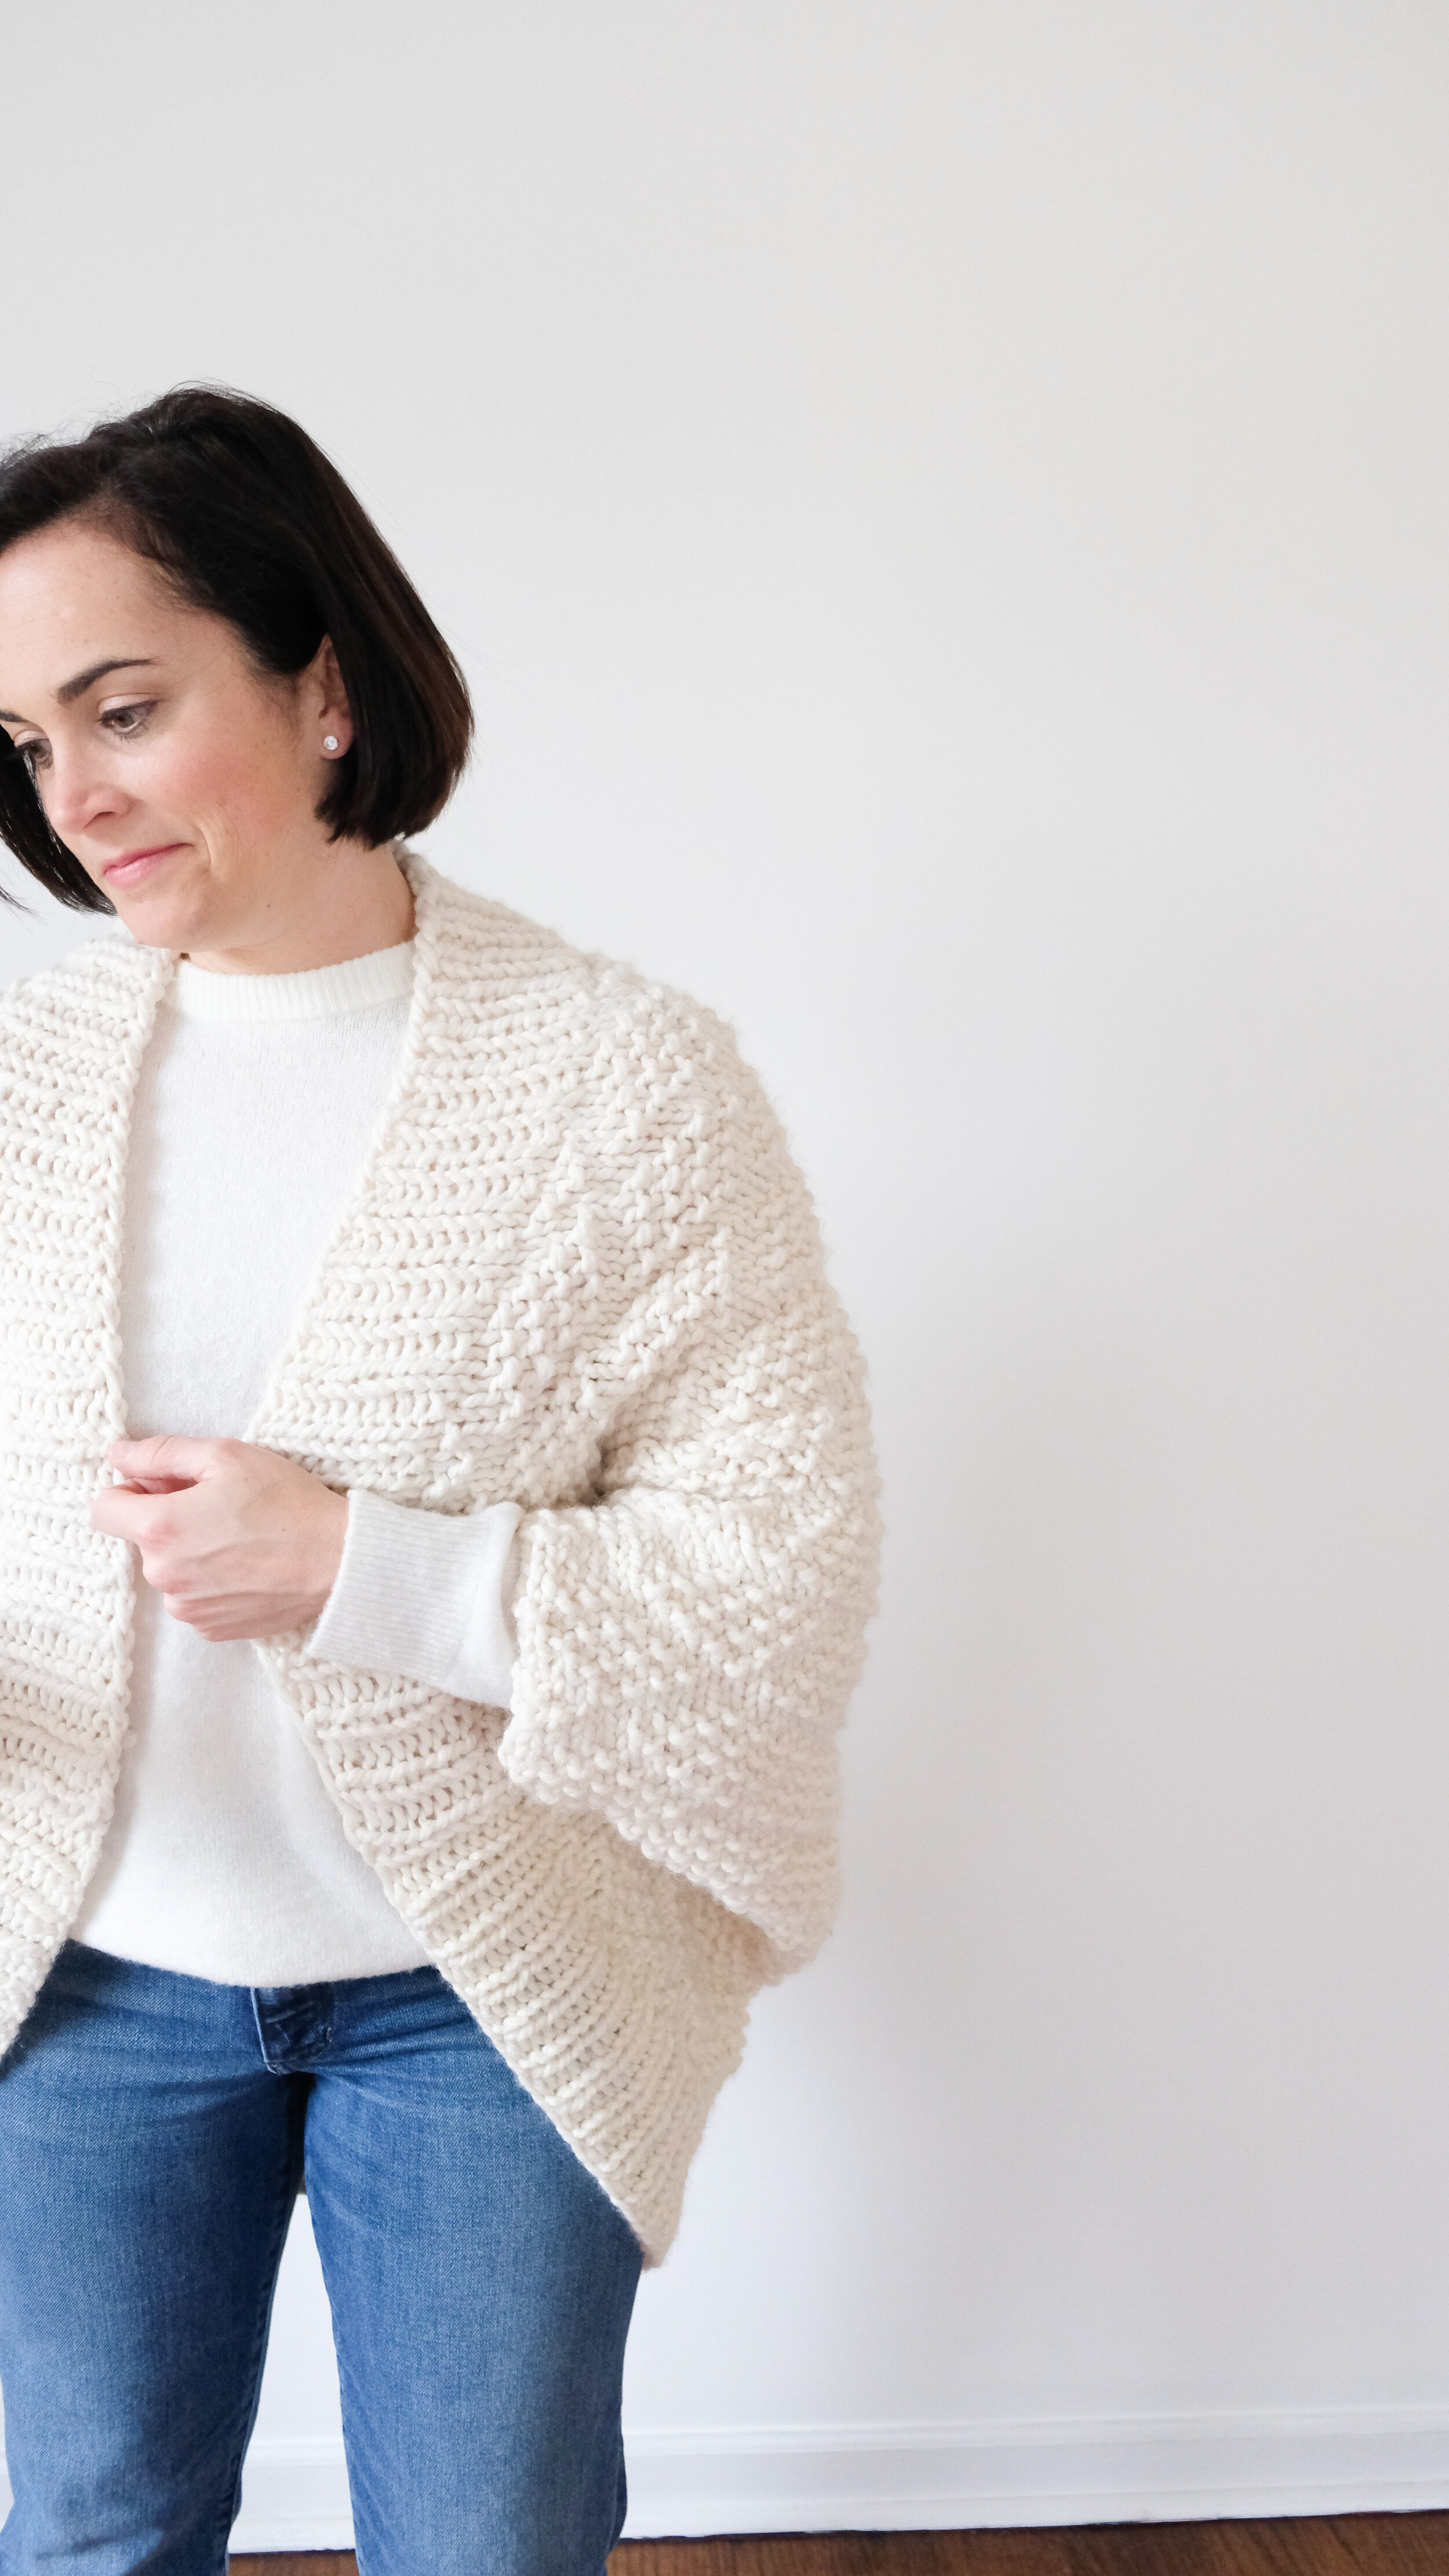 How To Knit A Cocoon Cardigan?